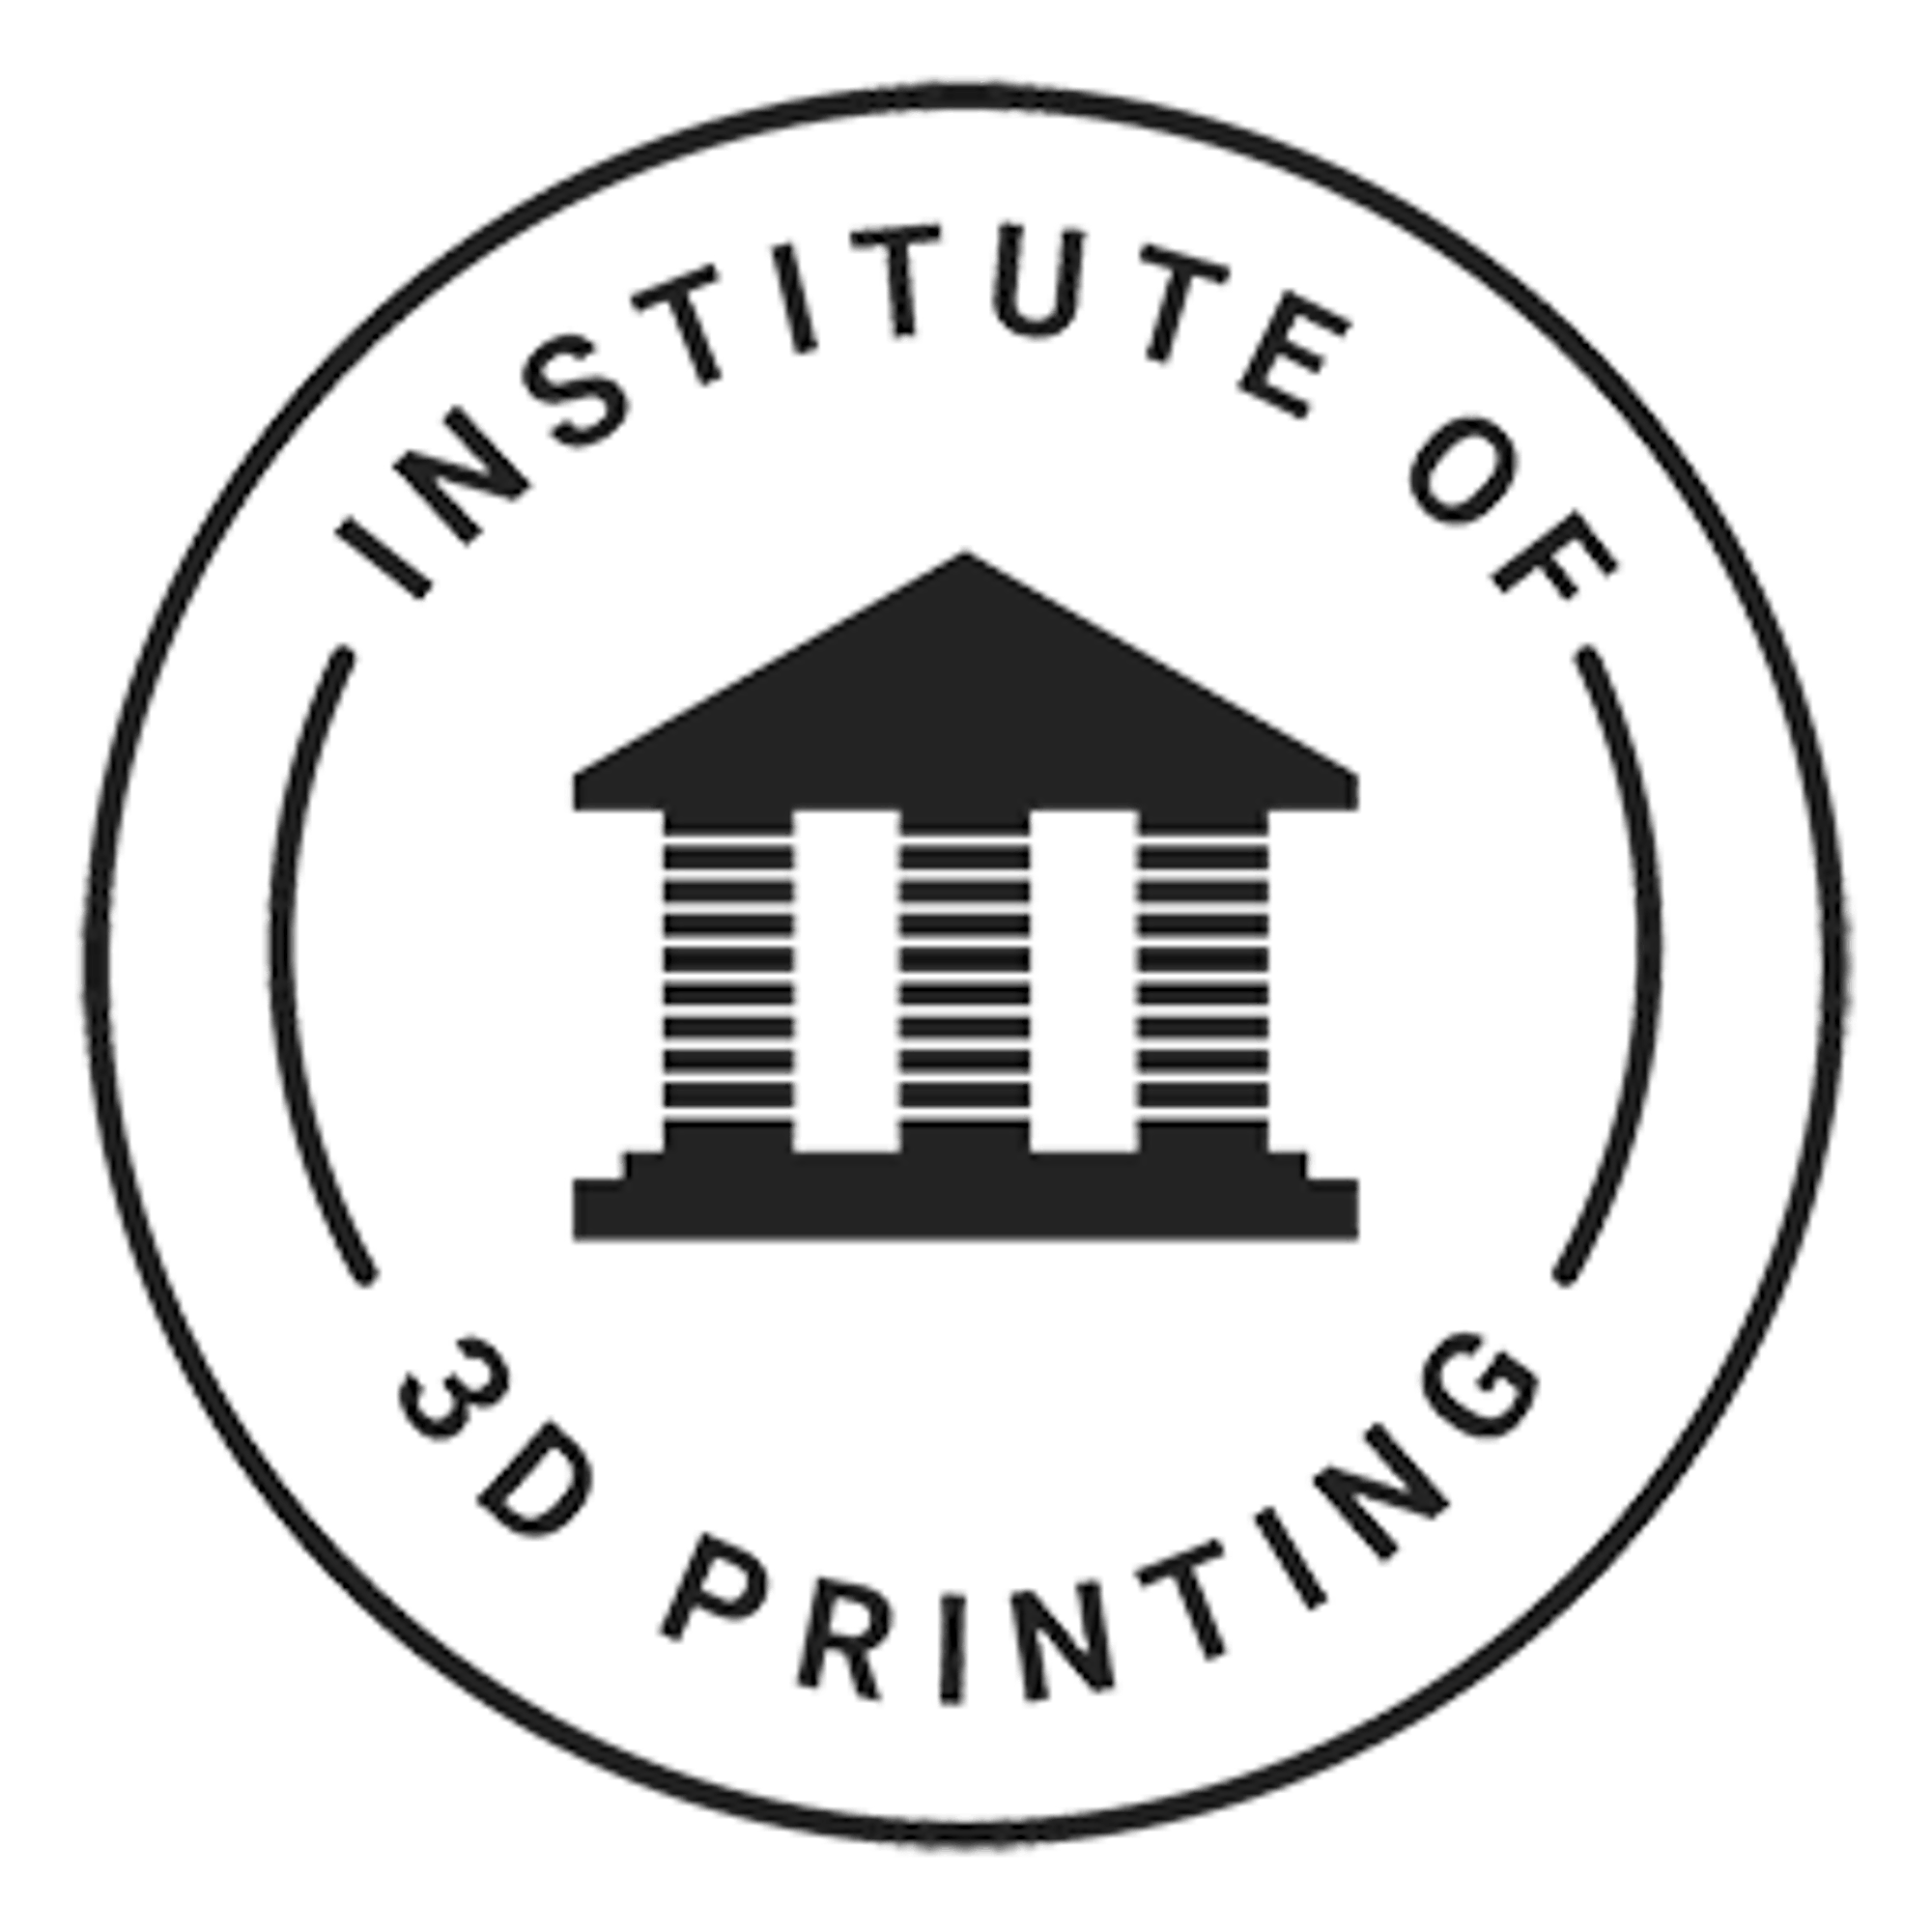 The Institute of 3D Printing